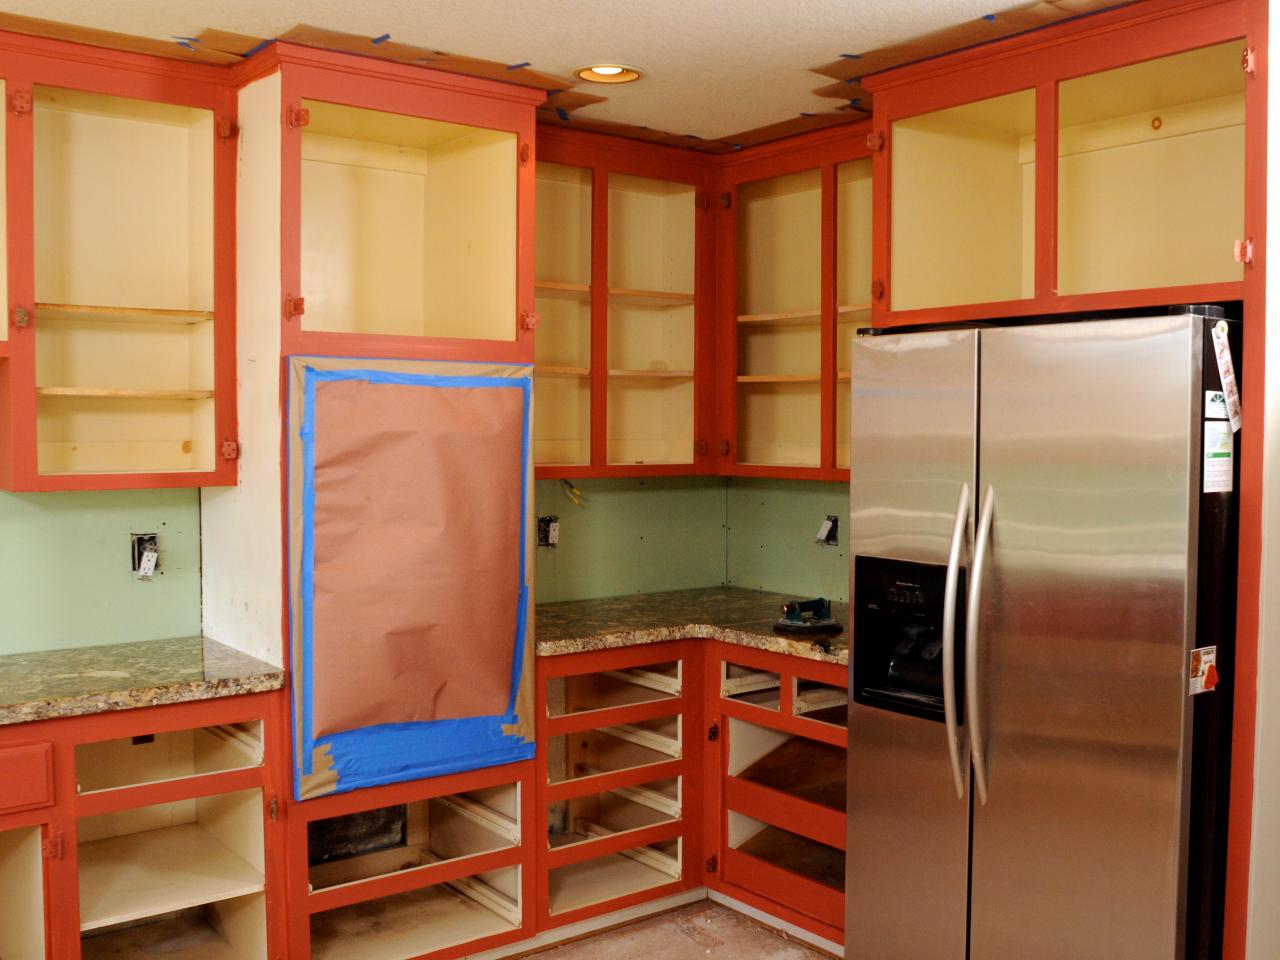 How To Paint Kitchen Cabinets In A Two, How To Protect Kitchen Cabinets When Painting